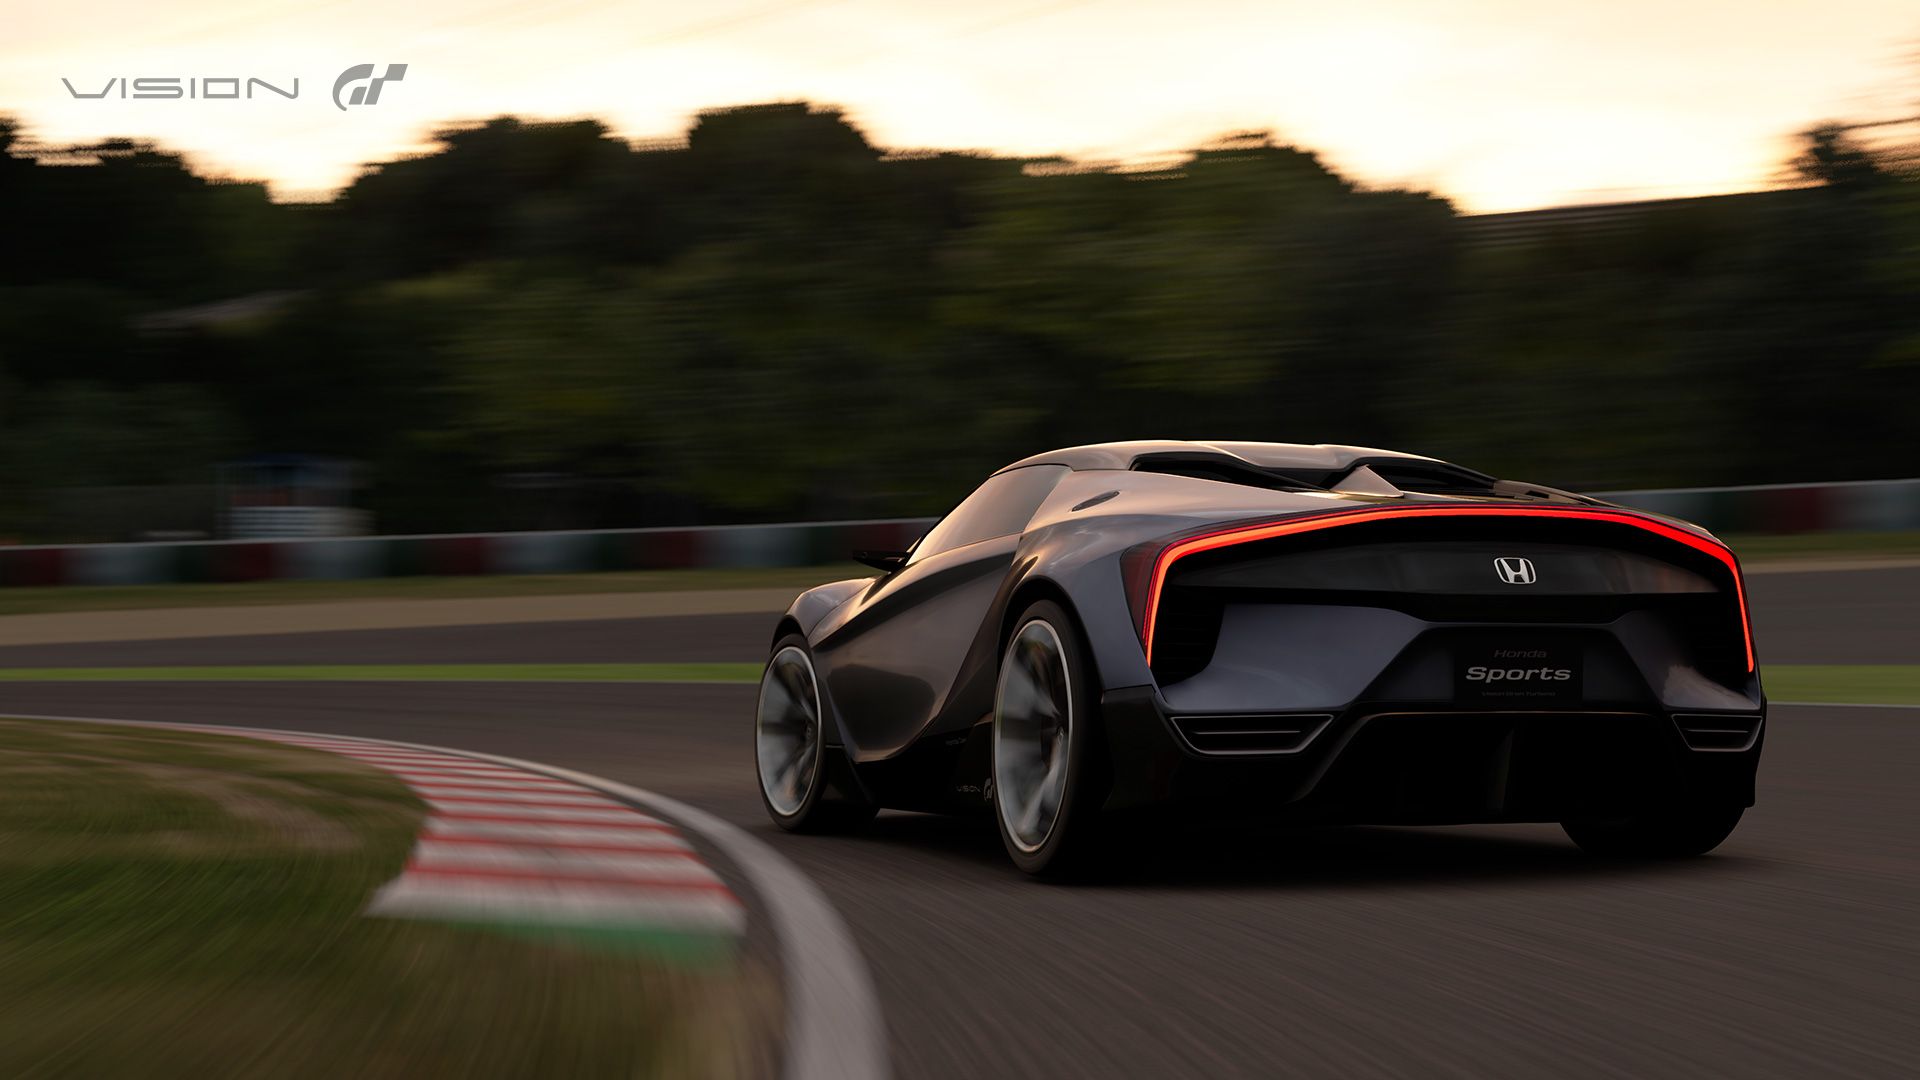 0 to 60 in 3.6 seconds; 180 mph top speed (speculative)